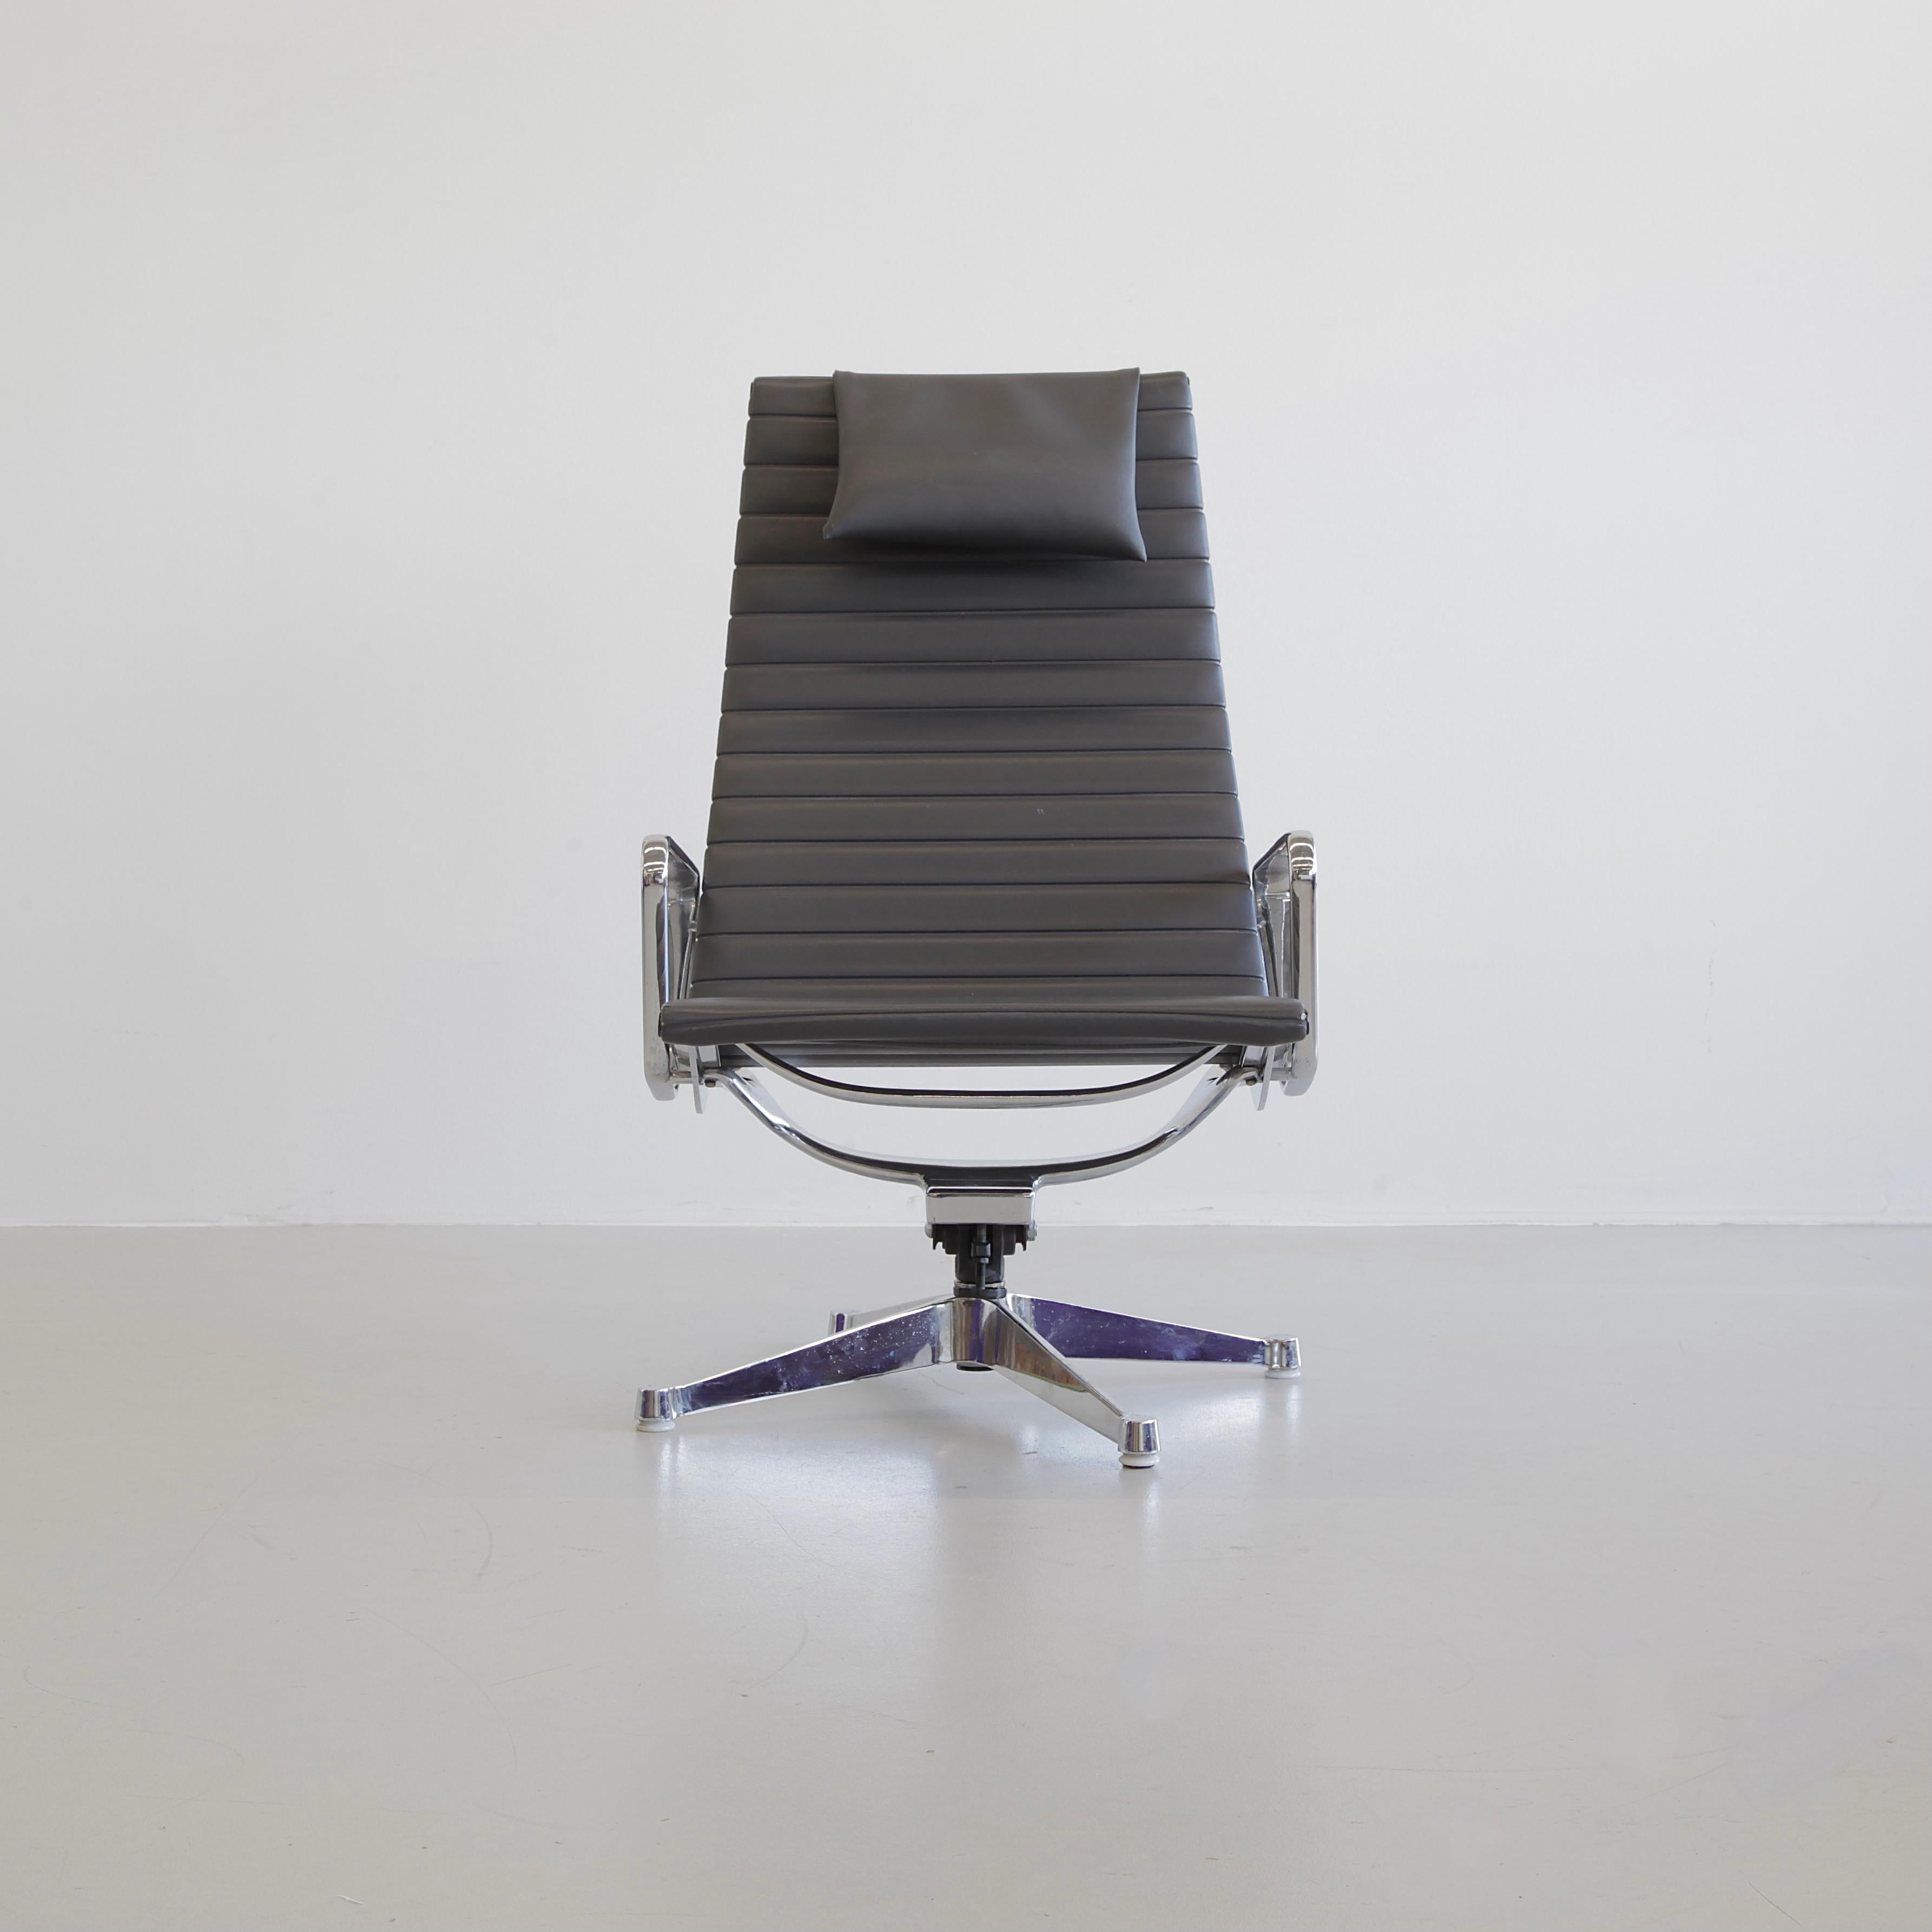 Aluminium highback chair designed by Charles & Ray Eames. U.S.A., Herman Miller, 1958.

A vintage swiveling highback chair with rocking function and polished aluminium frame. Upholstered in the original black leatherette, including the cushion.